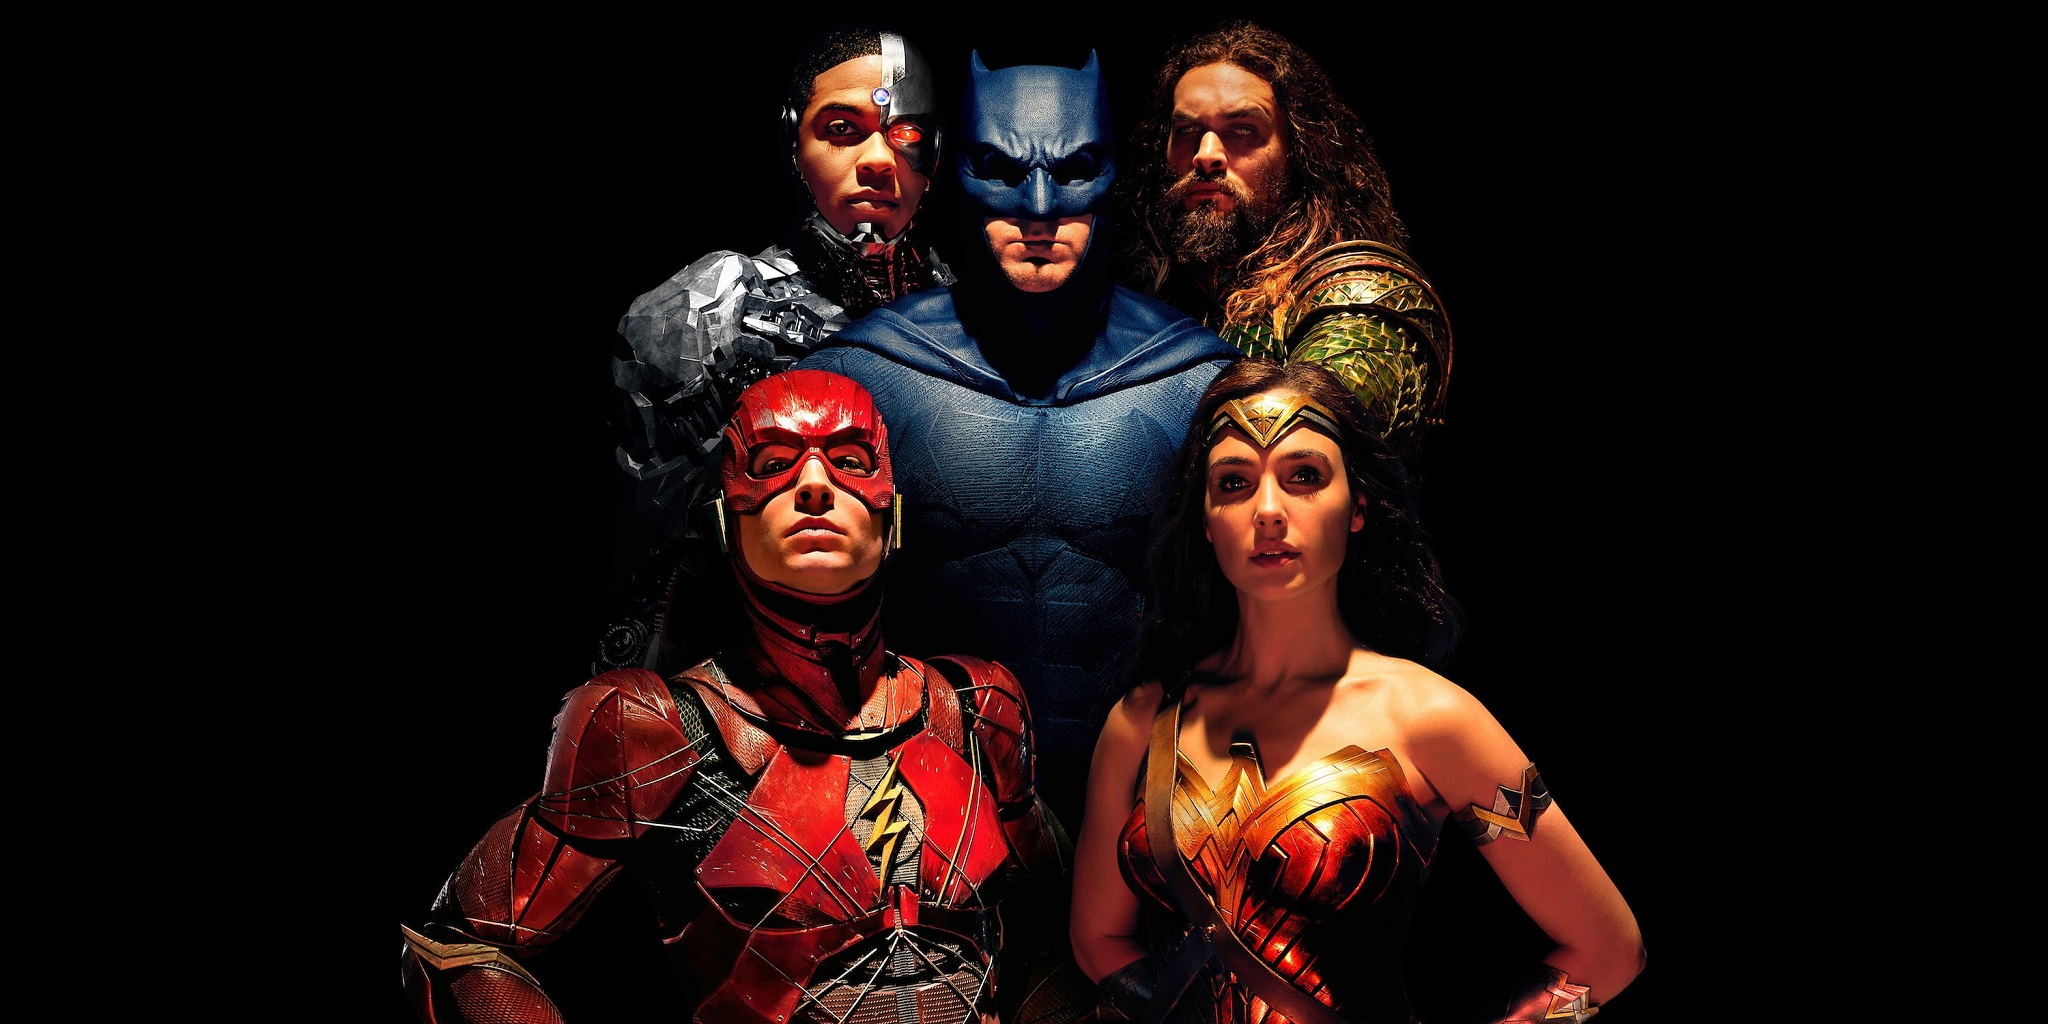 Justice-League-Poster.jpg